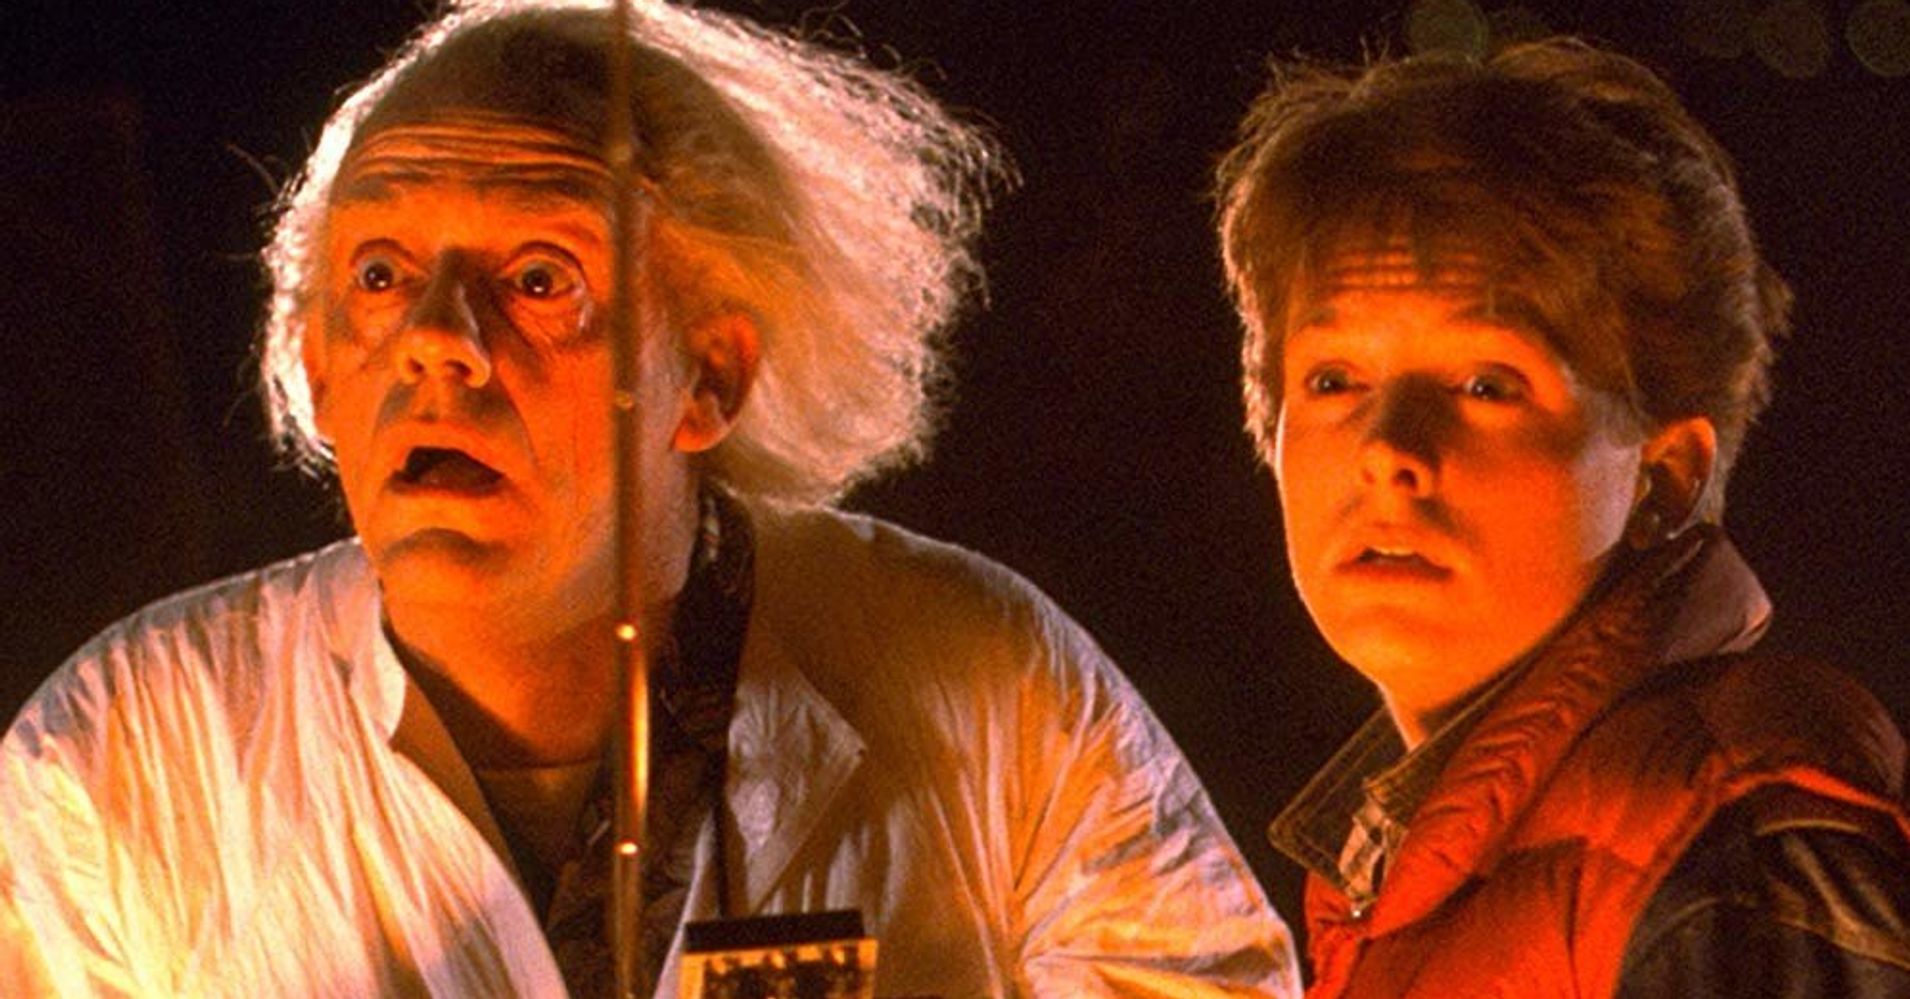 ‘Back To The Future’ Cast Reunion Photo Is A Perfect Blast From The